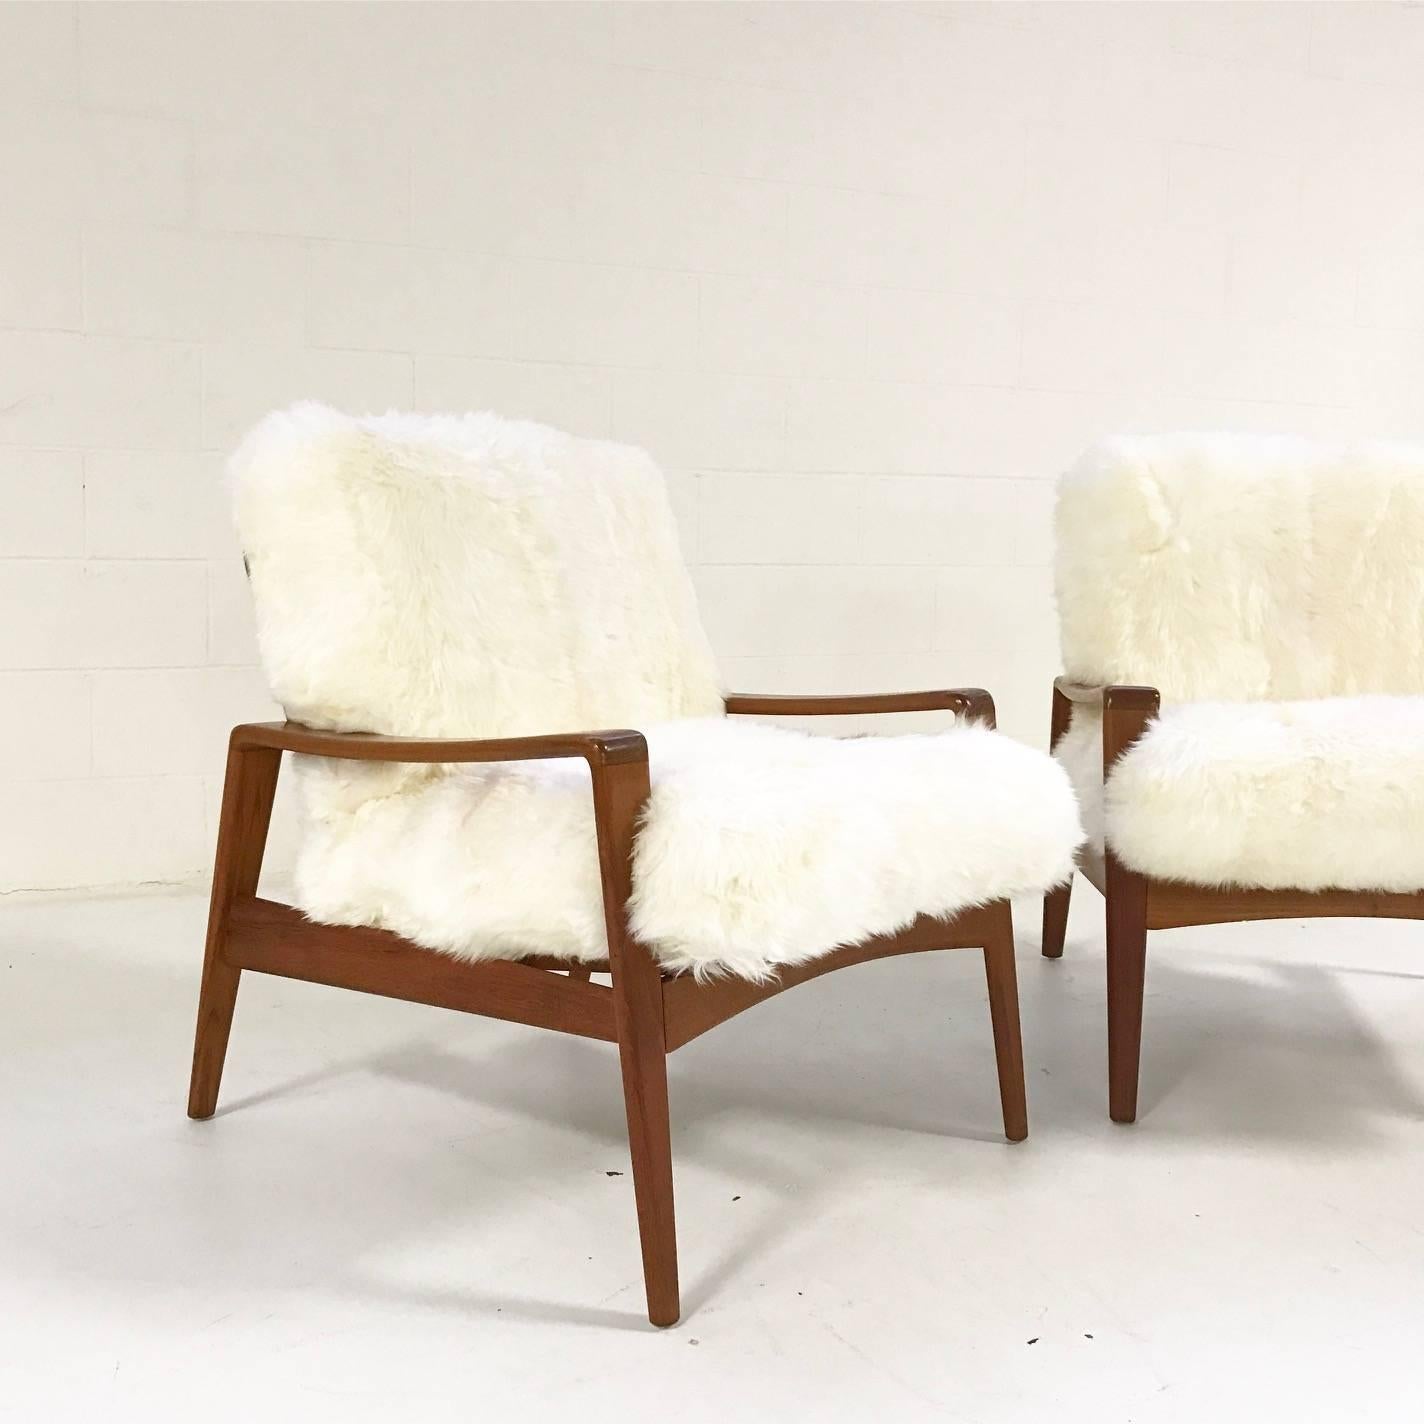 This is a beautiful pair of teak Danish lounge chairs designed by Arne Wahl Iversen for Komfort. Made in Denmark and manufactured in 1960. Our Forsyth design team chose our luxurious New Zealand sheepskin for the cushion upholstery. Like sitting on